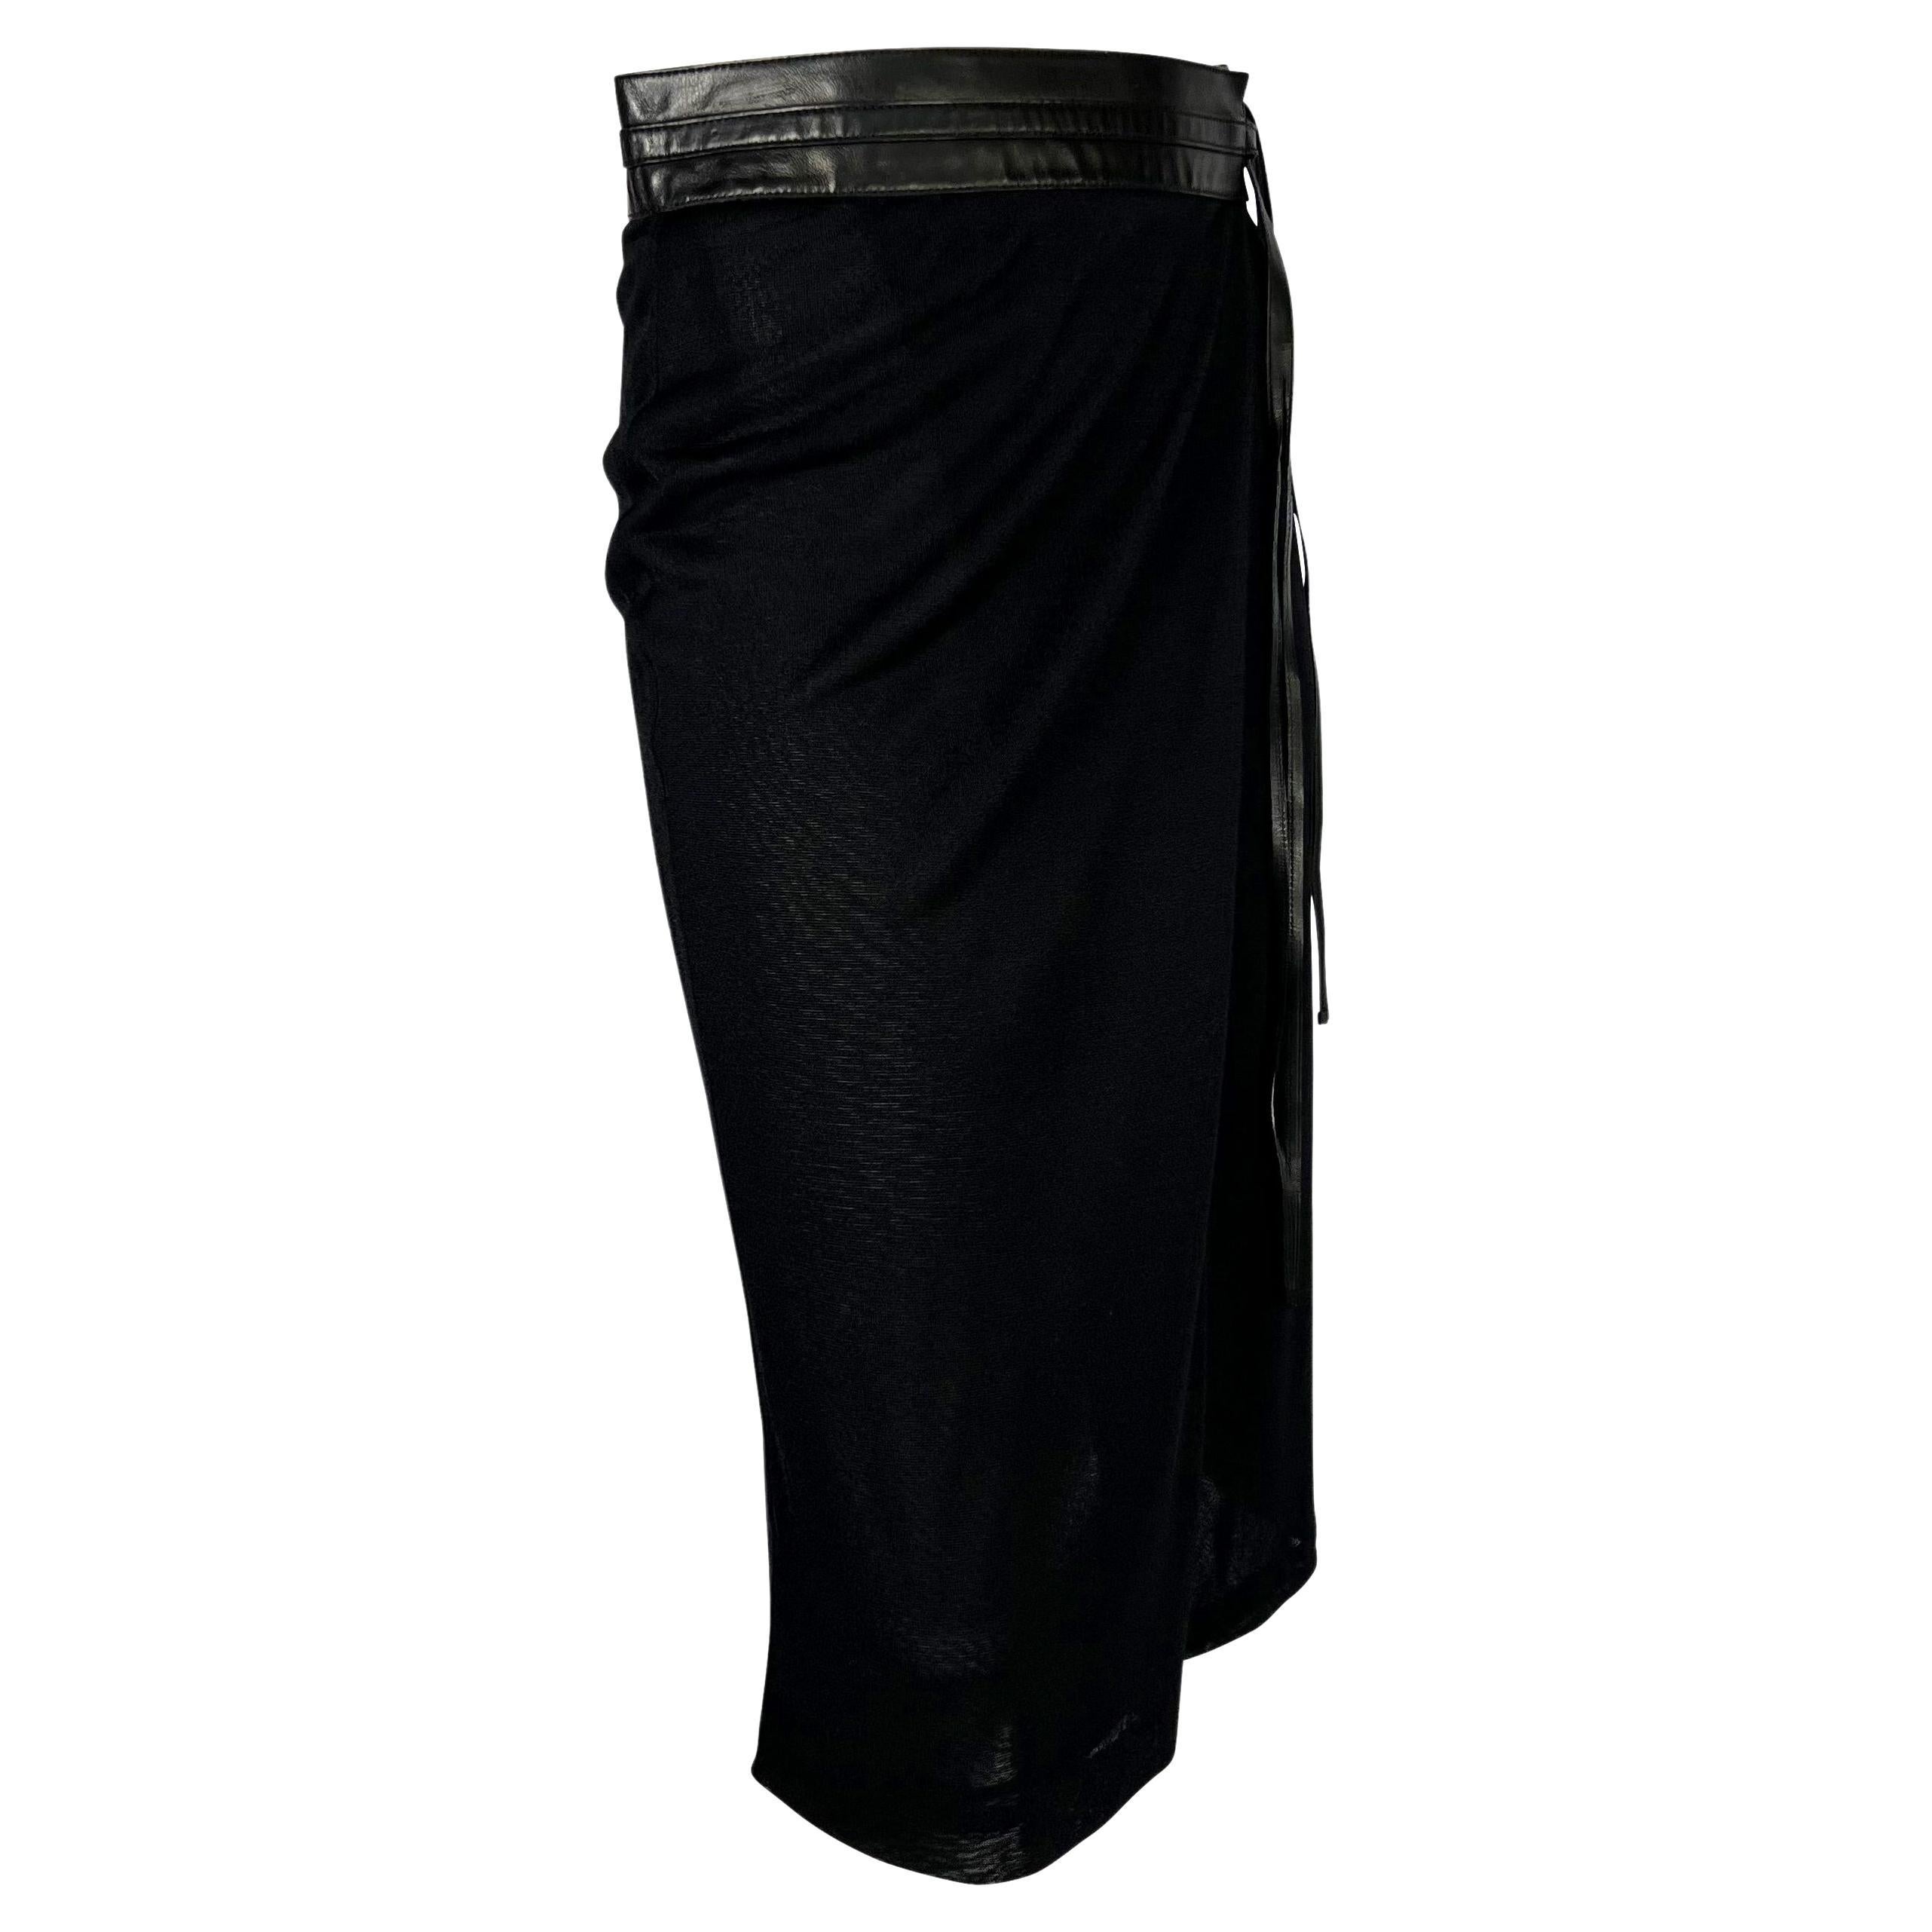 S/S 2001 Gucci by Tom Ford Sheer Black Leather Belted Wrap Skirt For Sale 2